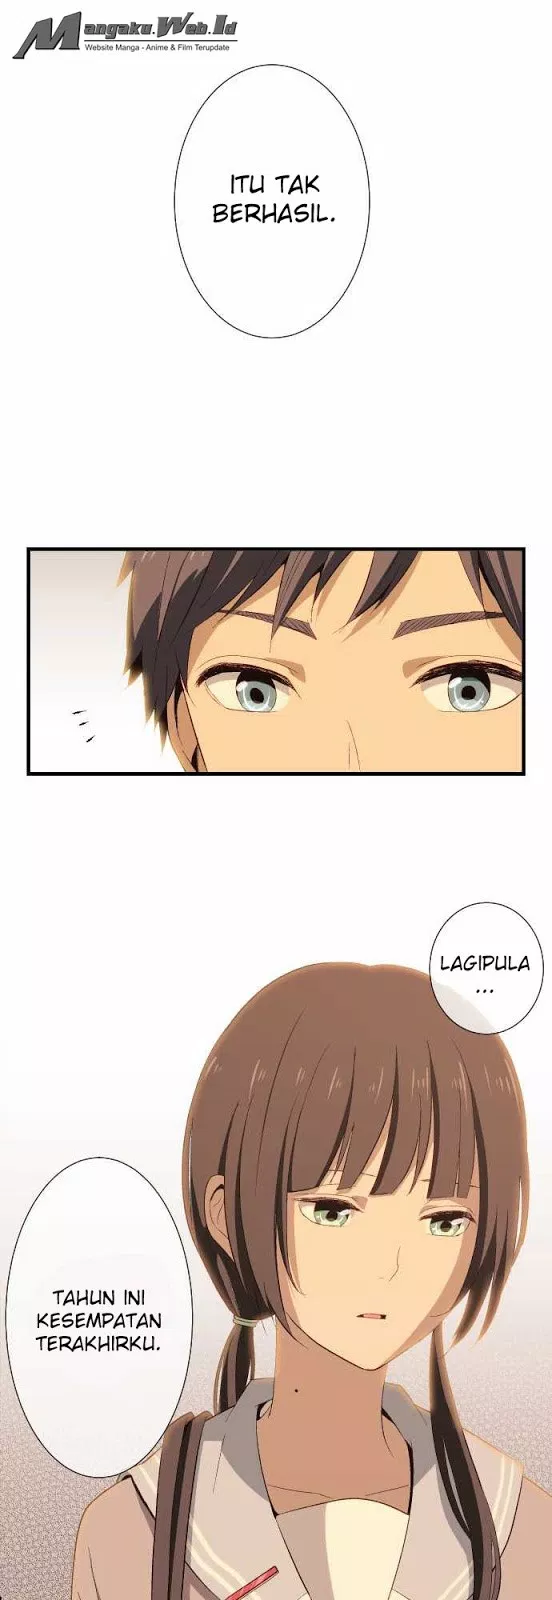 ReLIFE Chapter 18